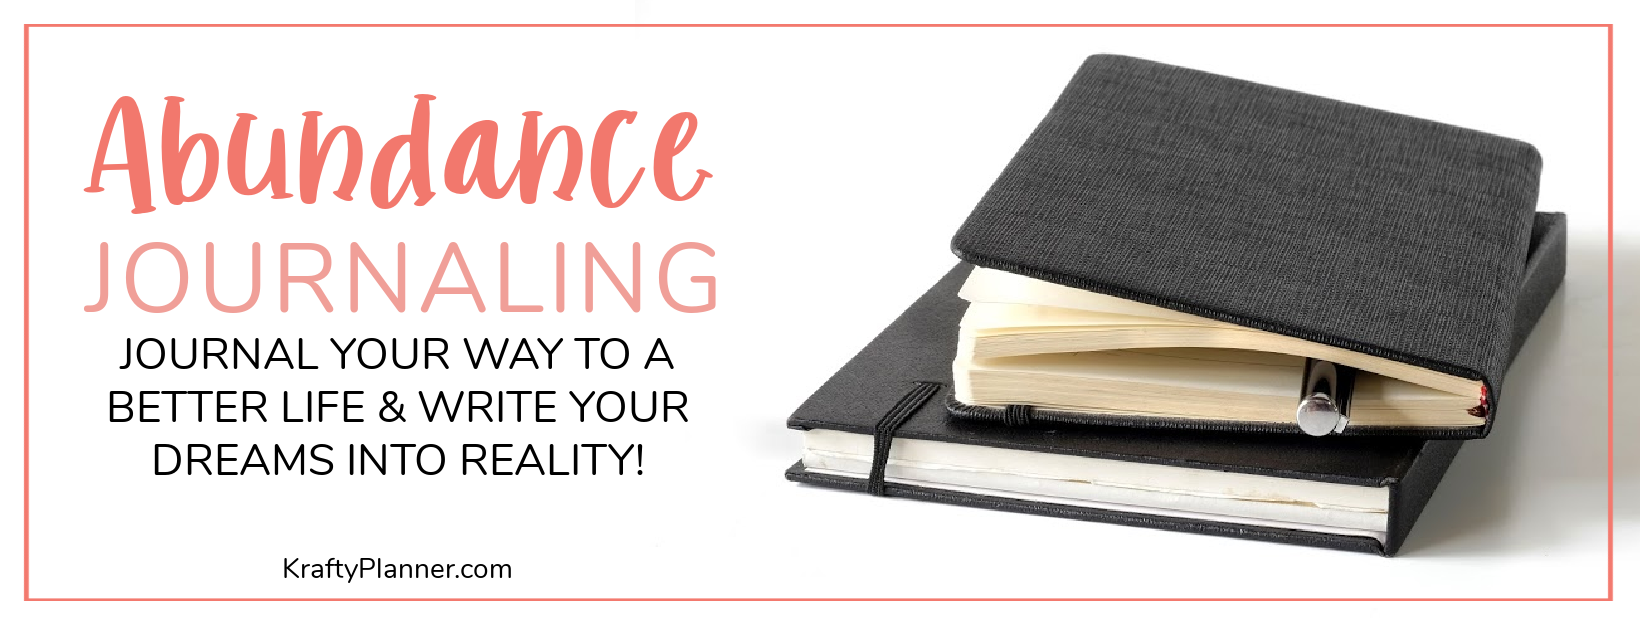 ABUNDANCE JOURNALING: Journal your way to a better life and write your dreams into reality!